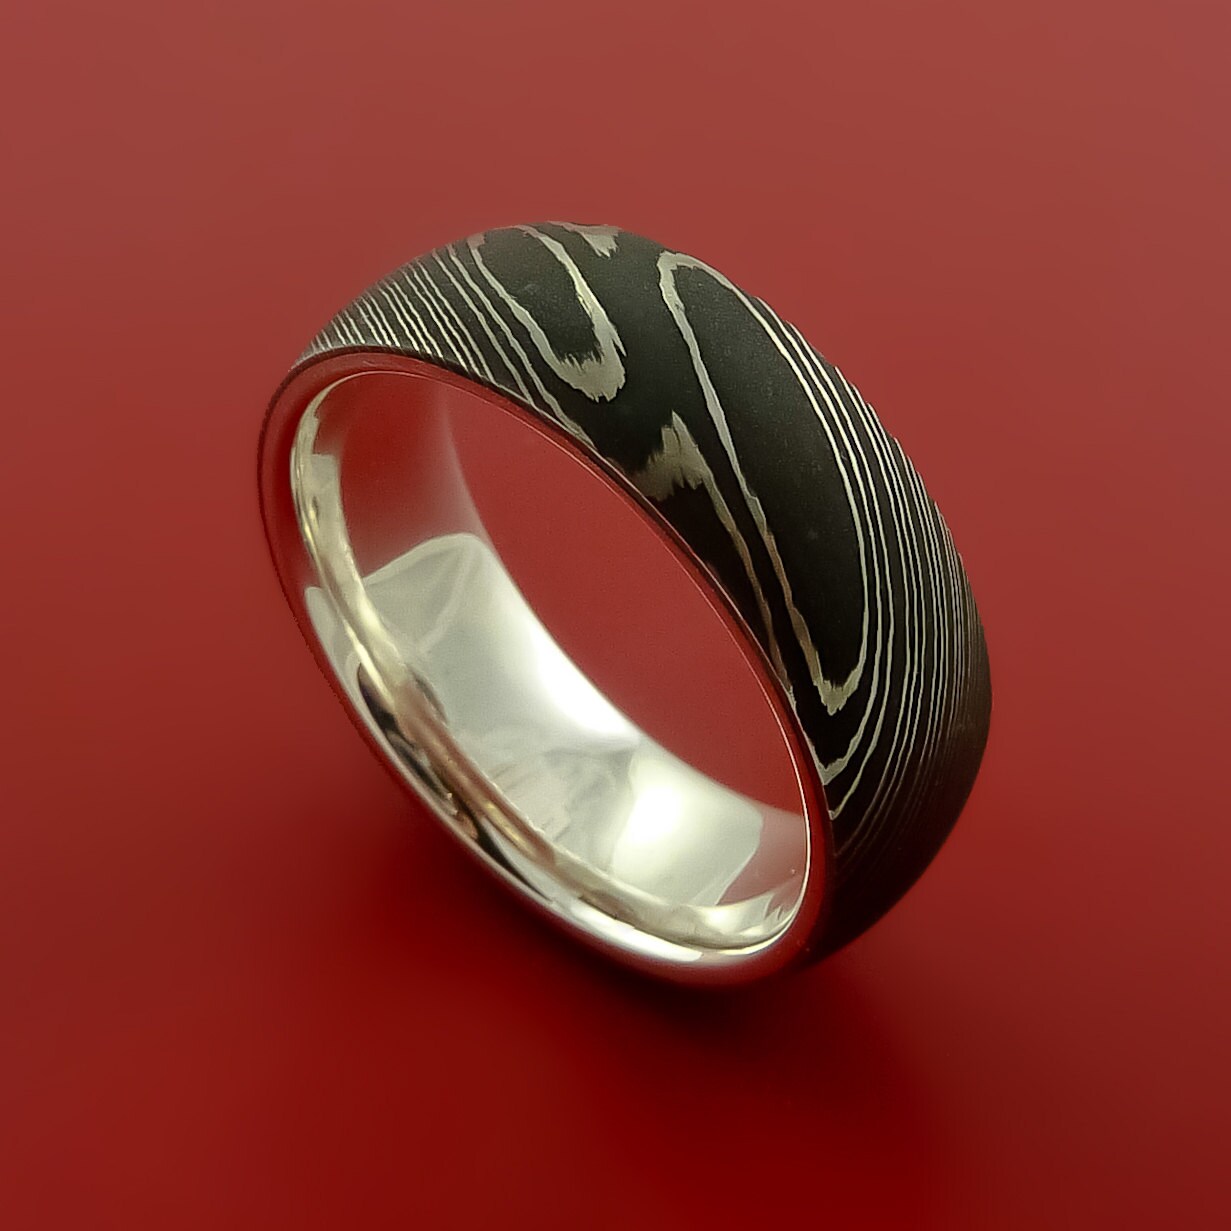 Damascus Steel Ring with Solid Sterling Silver Sleeve Wedding